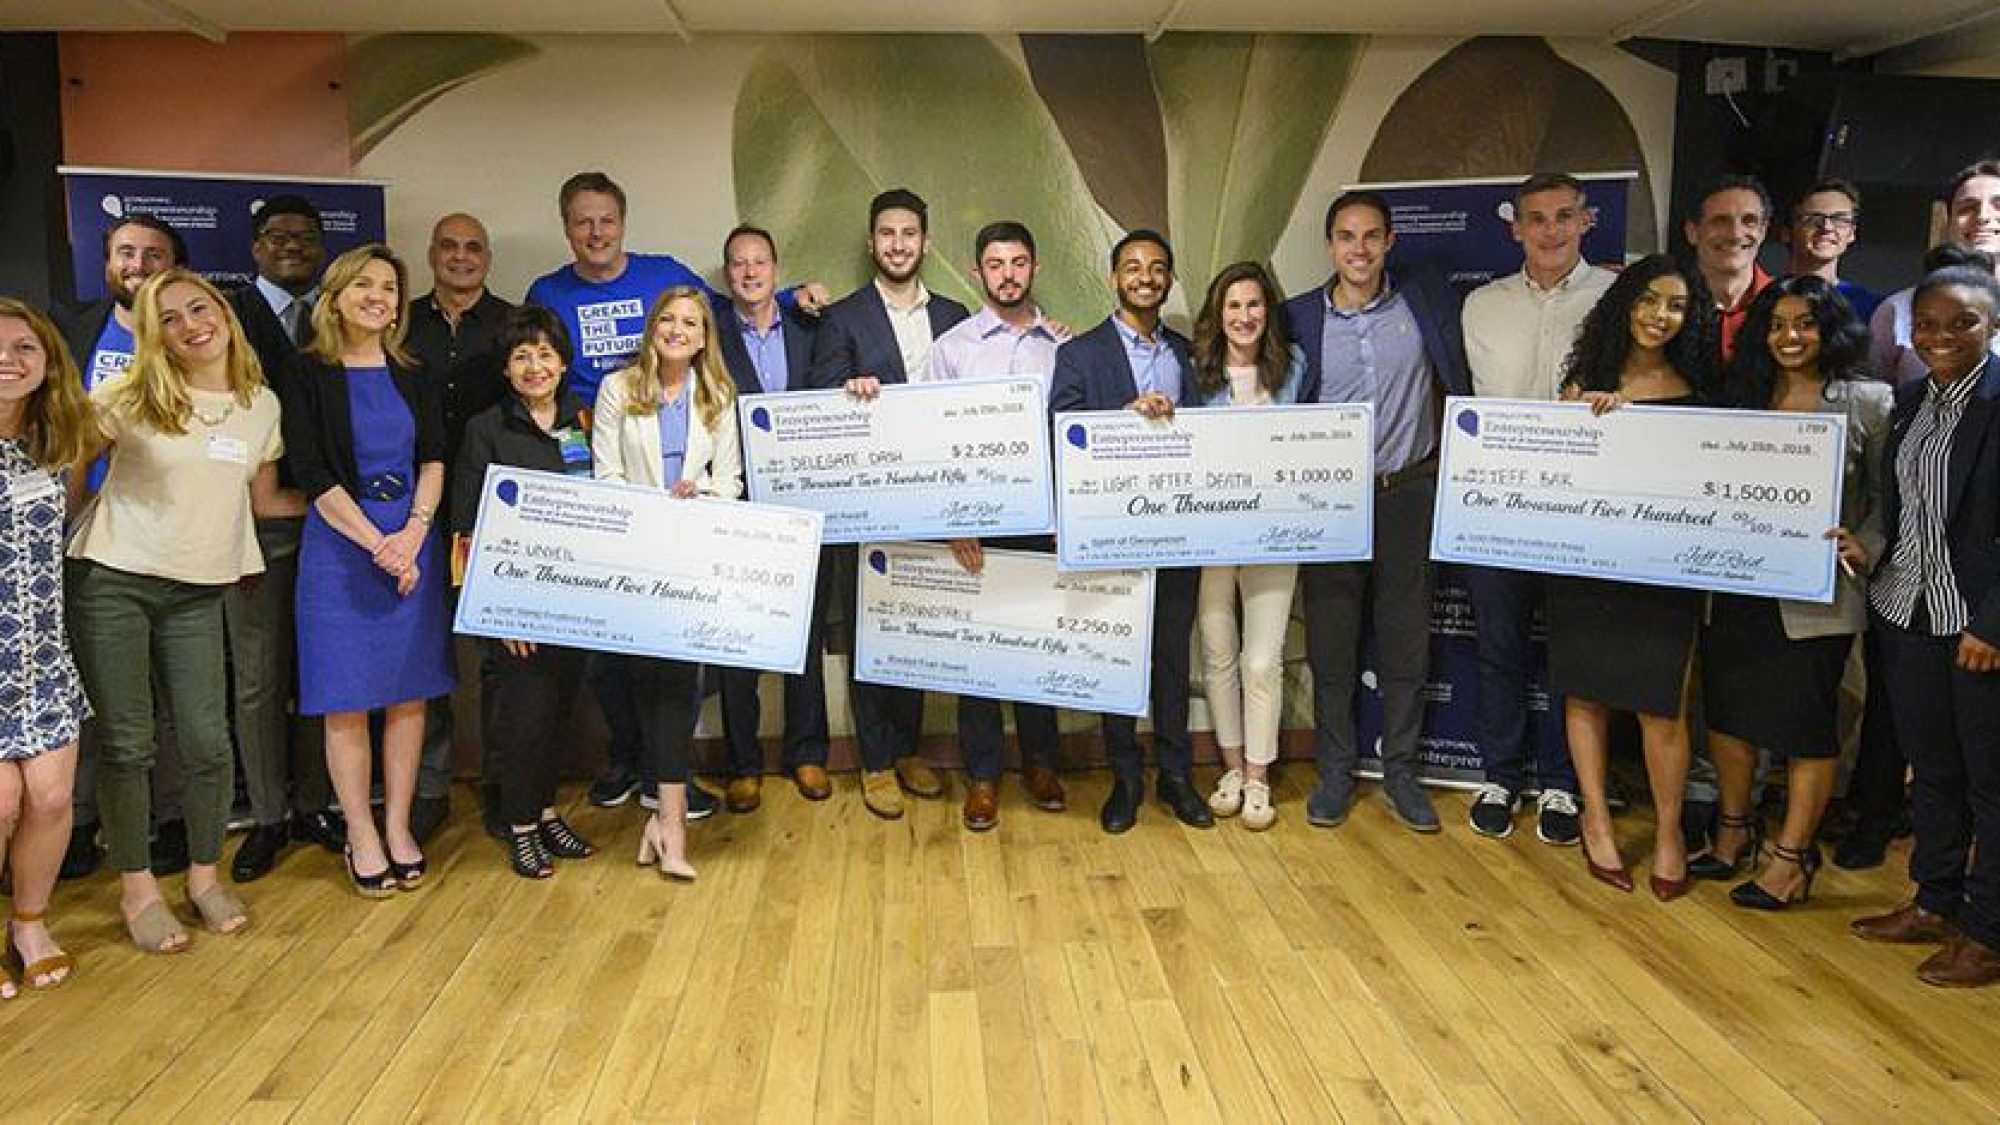 Members of the 2019 Summer Launch Incubator, some holding large checks.